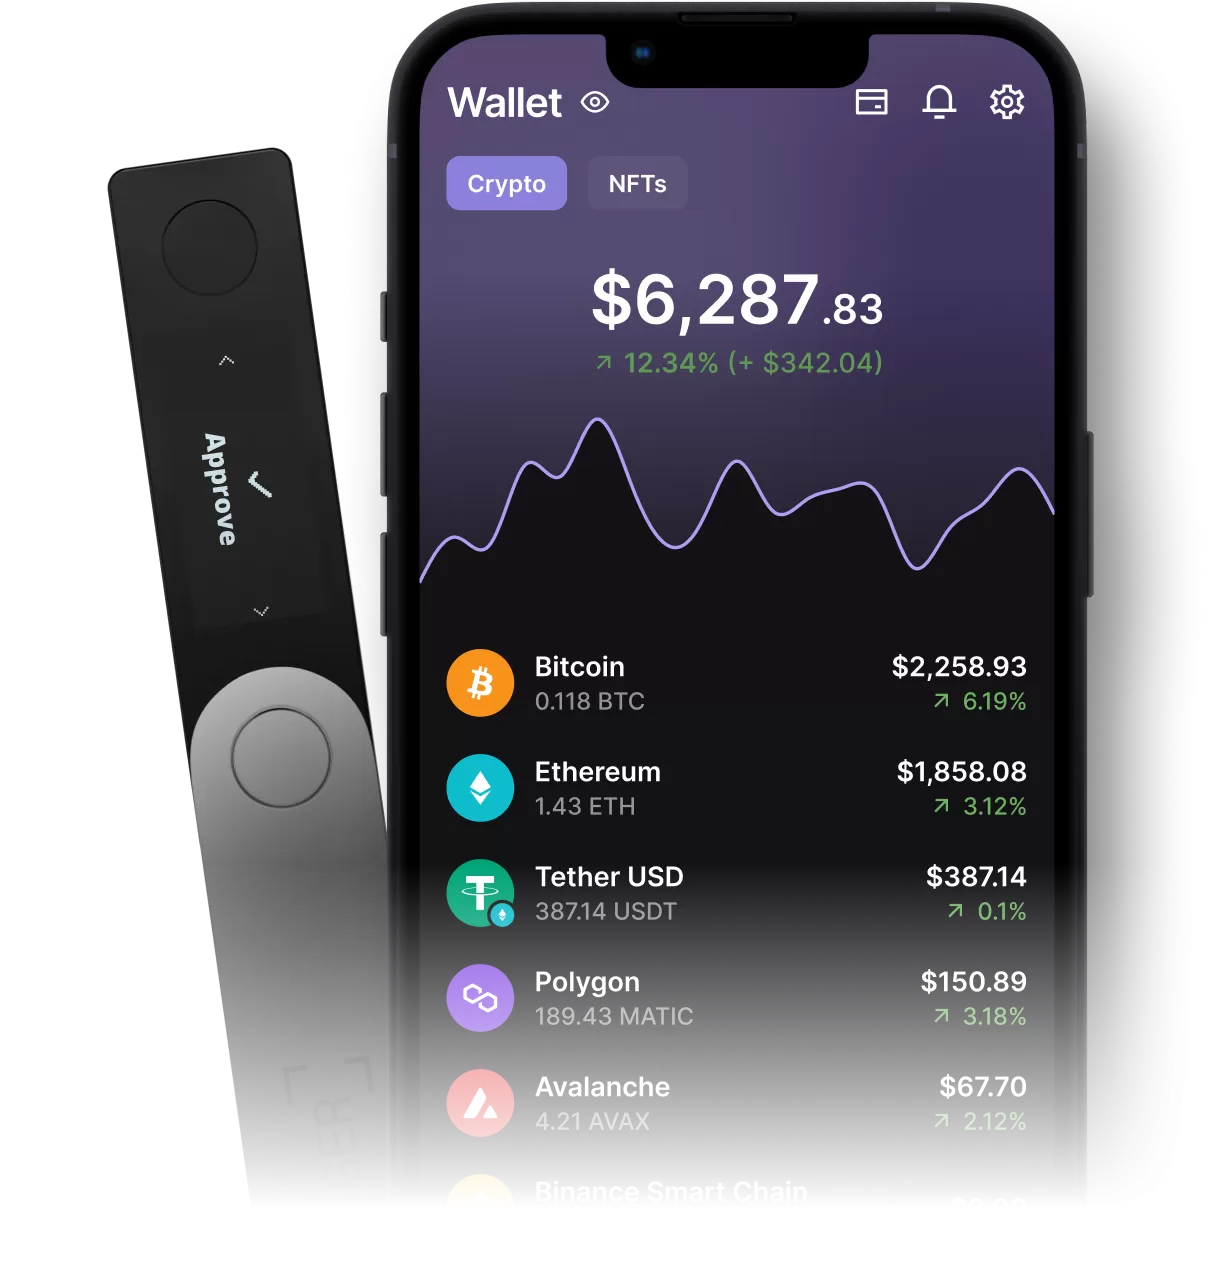 Leather – the Bitcoin wallet for the rest of us